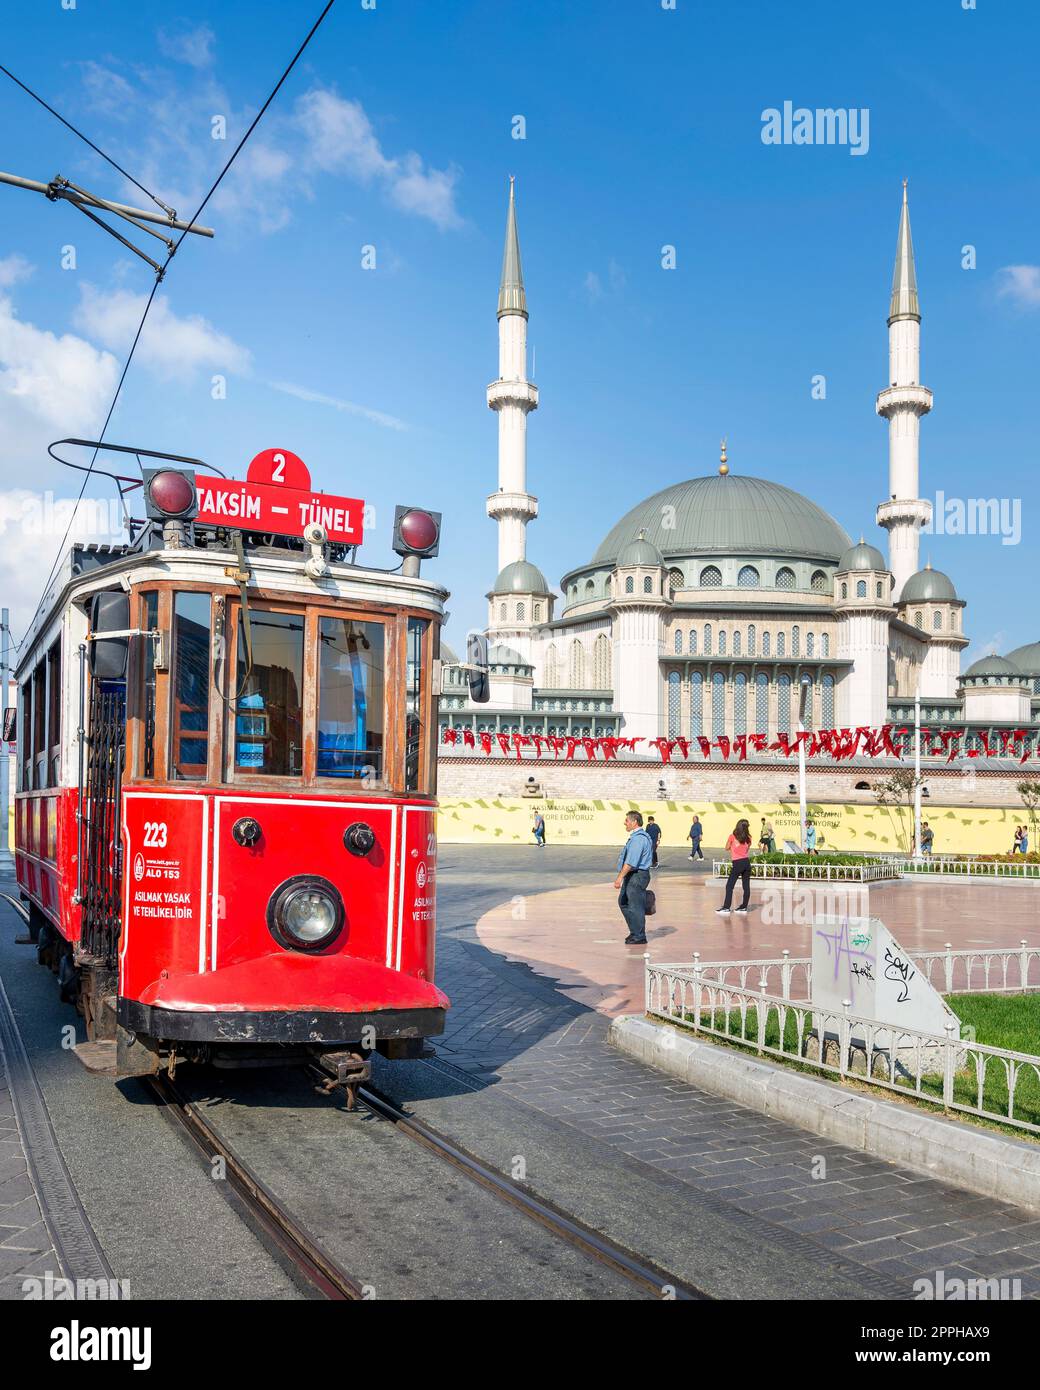 Nostalgic Taksim Tunel Red Tram, or tramvay, with Taksim Mosque in the background, at Taksim Square, Istanbul, Turkey Stock Photo